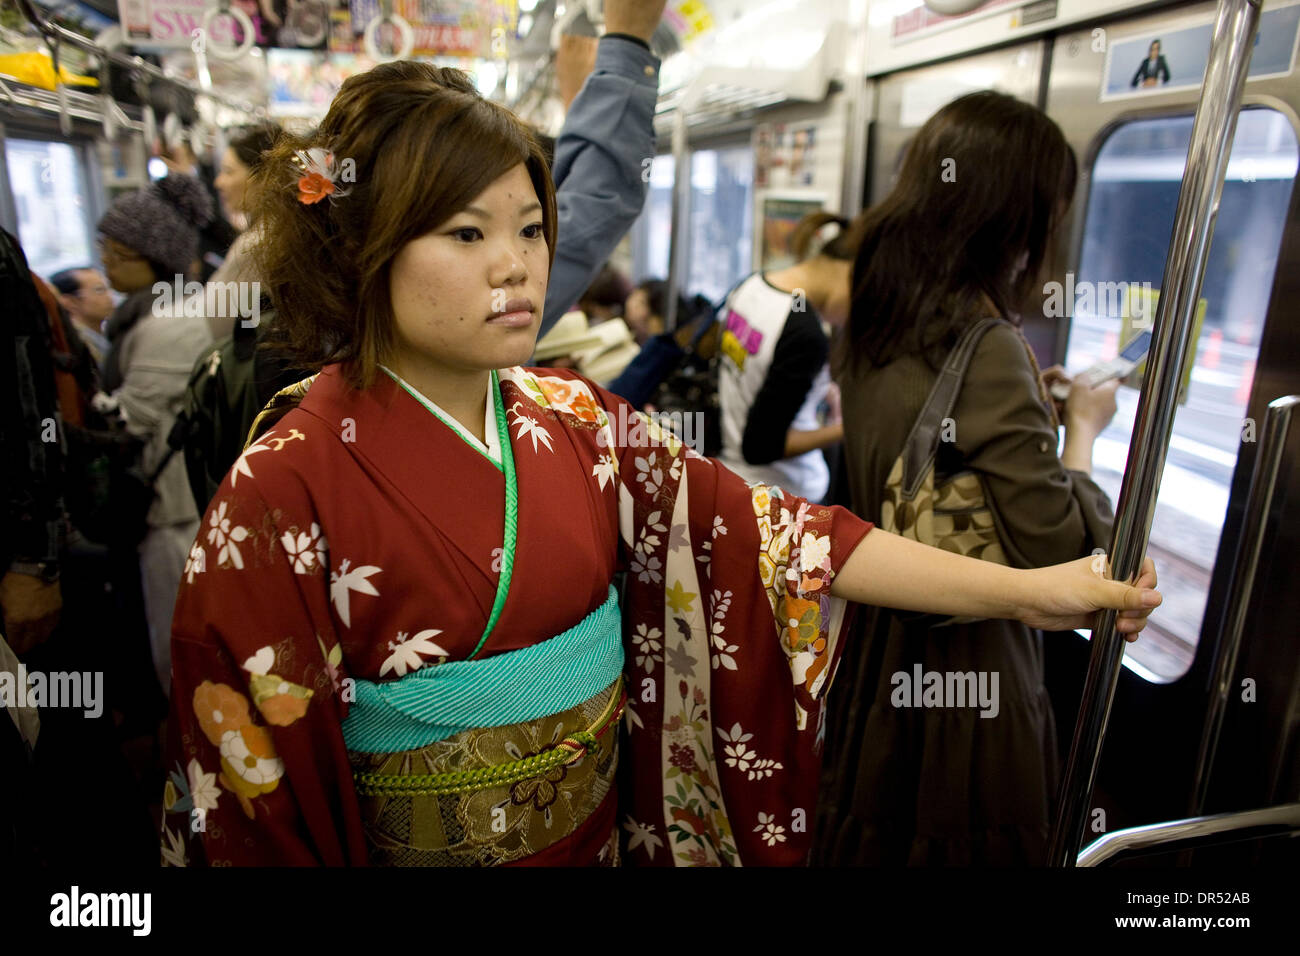 Dec 15, 2008 - Tokyo, Japan - In a traditional kimono, a young woman rides the train. Tokyo's subway system is well developed and organised. With trains arriving every two minutes, some stations can transport more than one million passengers a day. Stock Photo